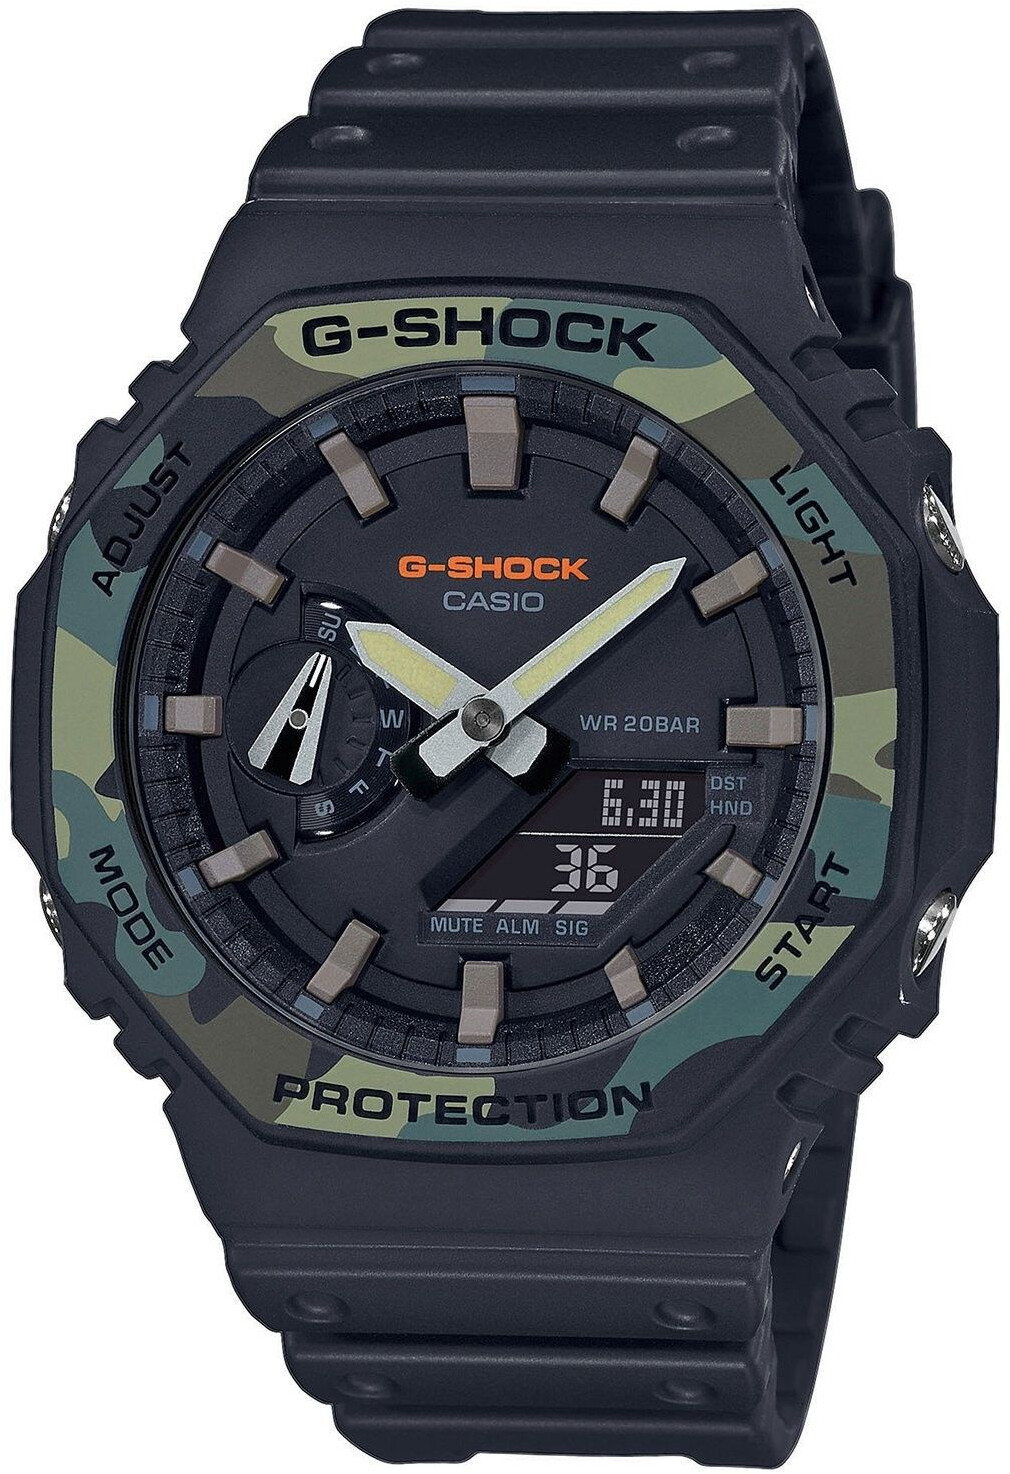 Buy Casio G-Shock GA-2100 from £90.63 (Today) – Best Deals on idealo.co.uk